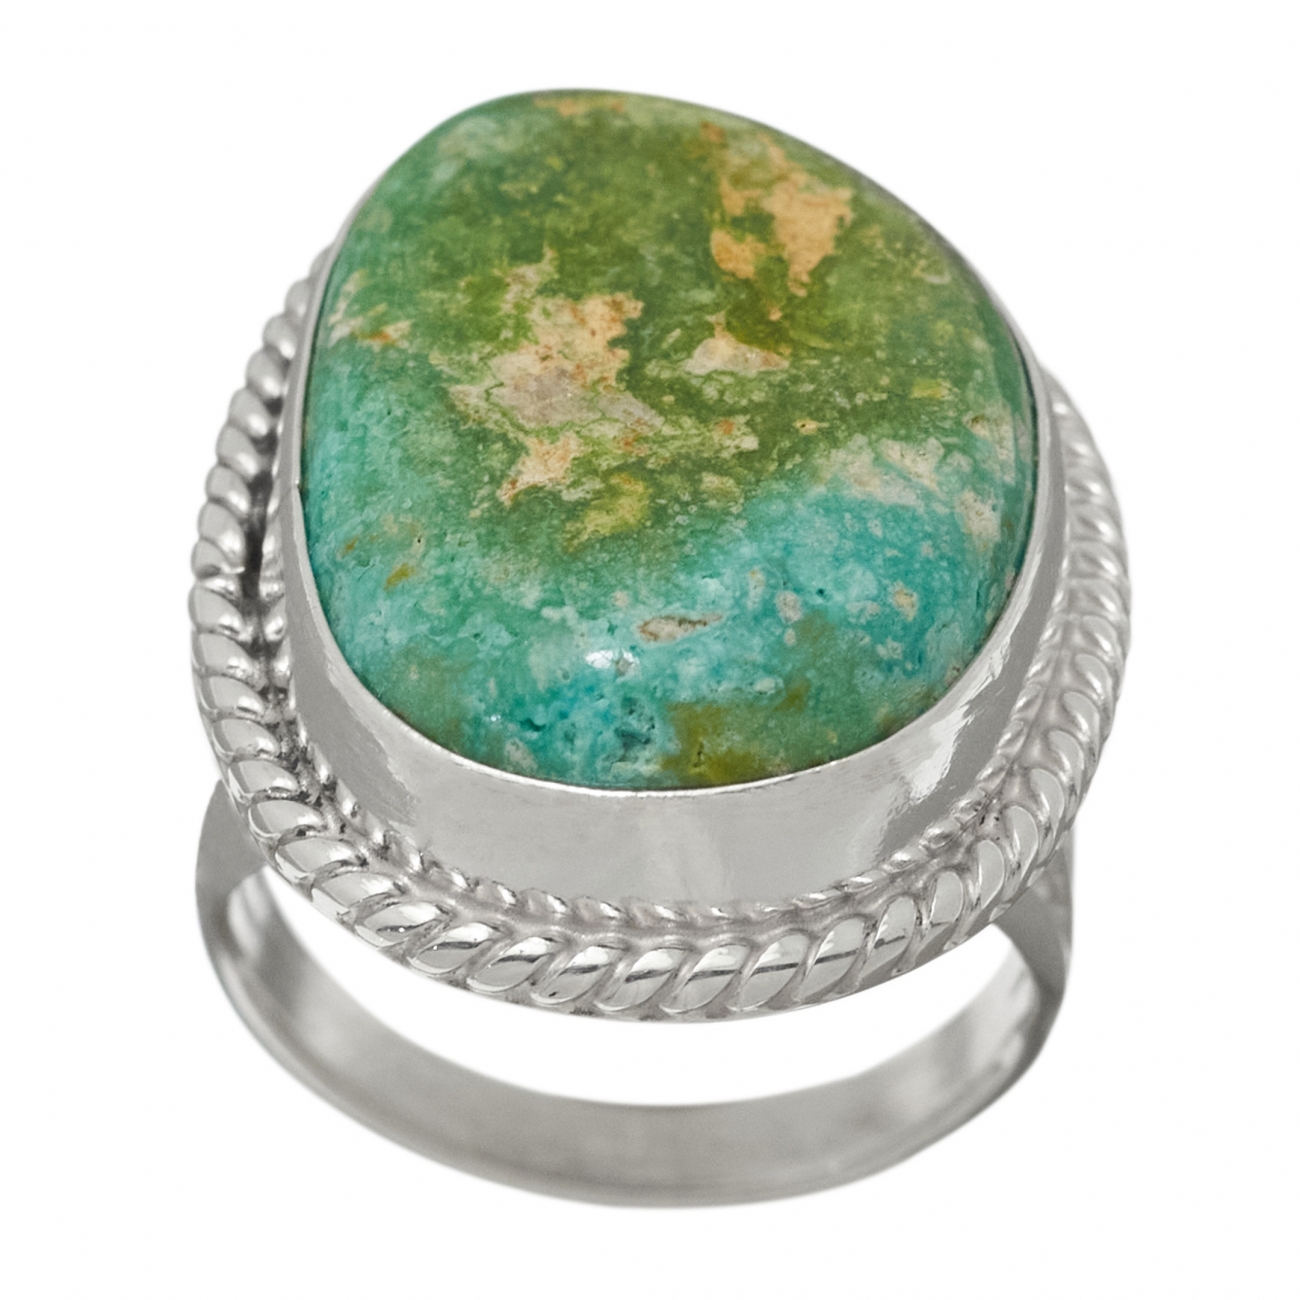 Navajo ring for women BA1031 in turquoise and silver - Harpo Paris